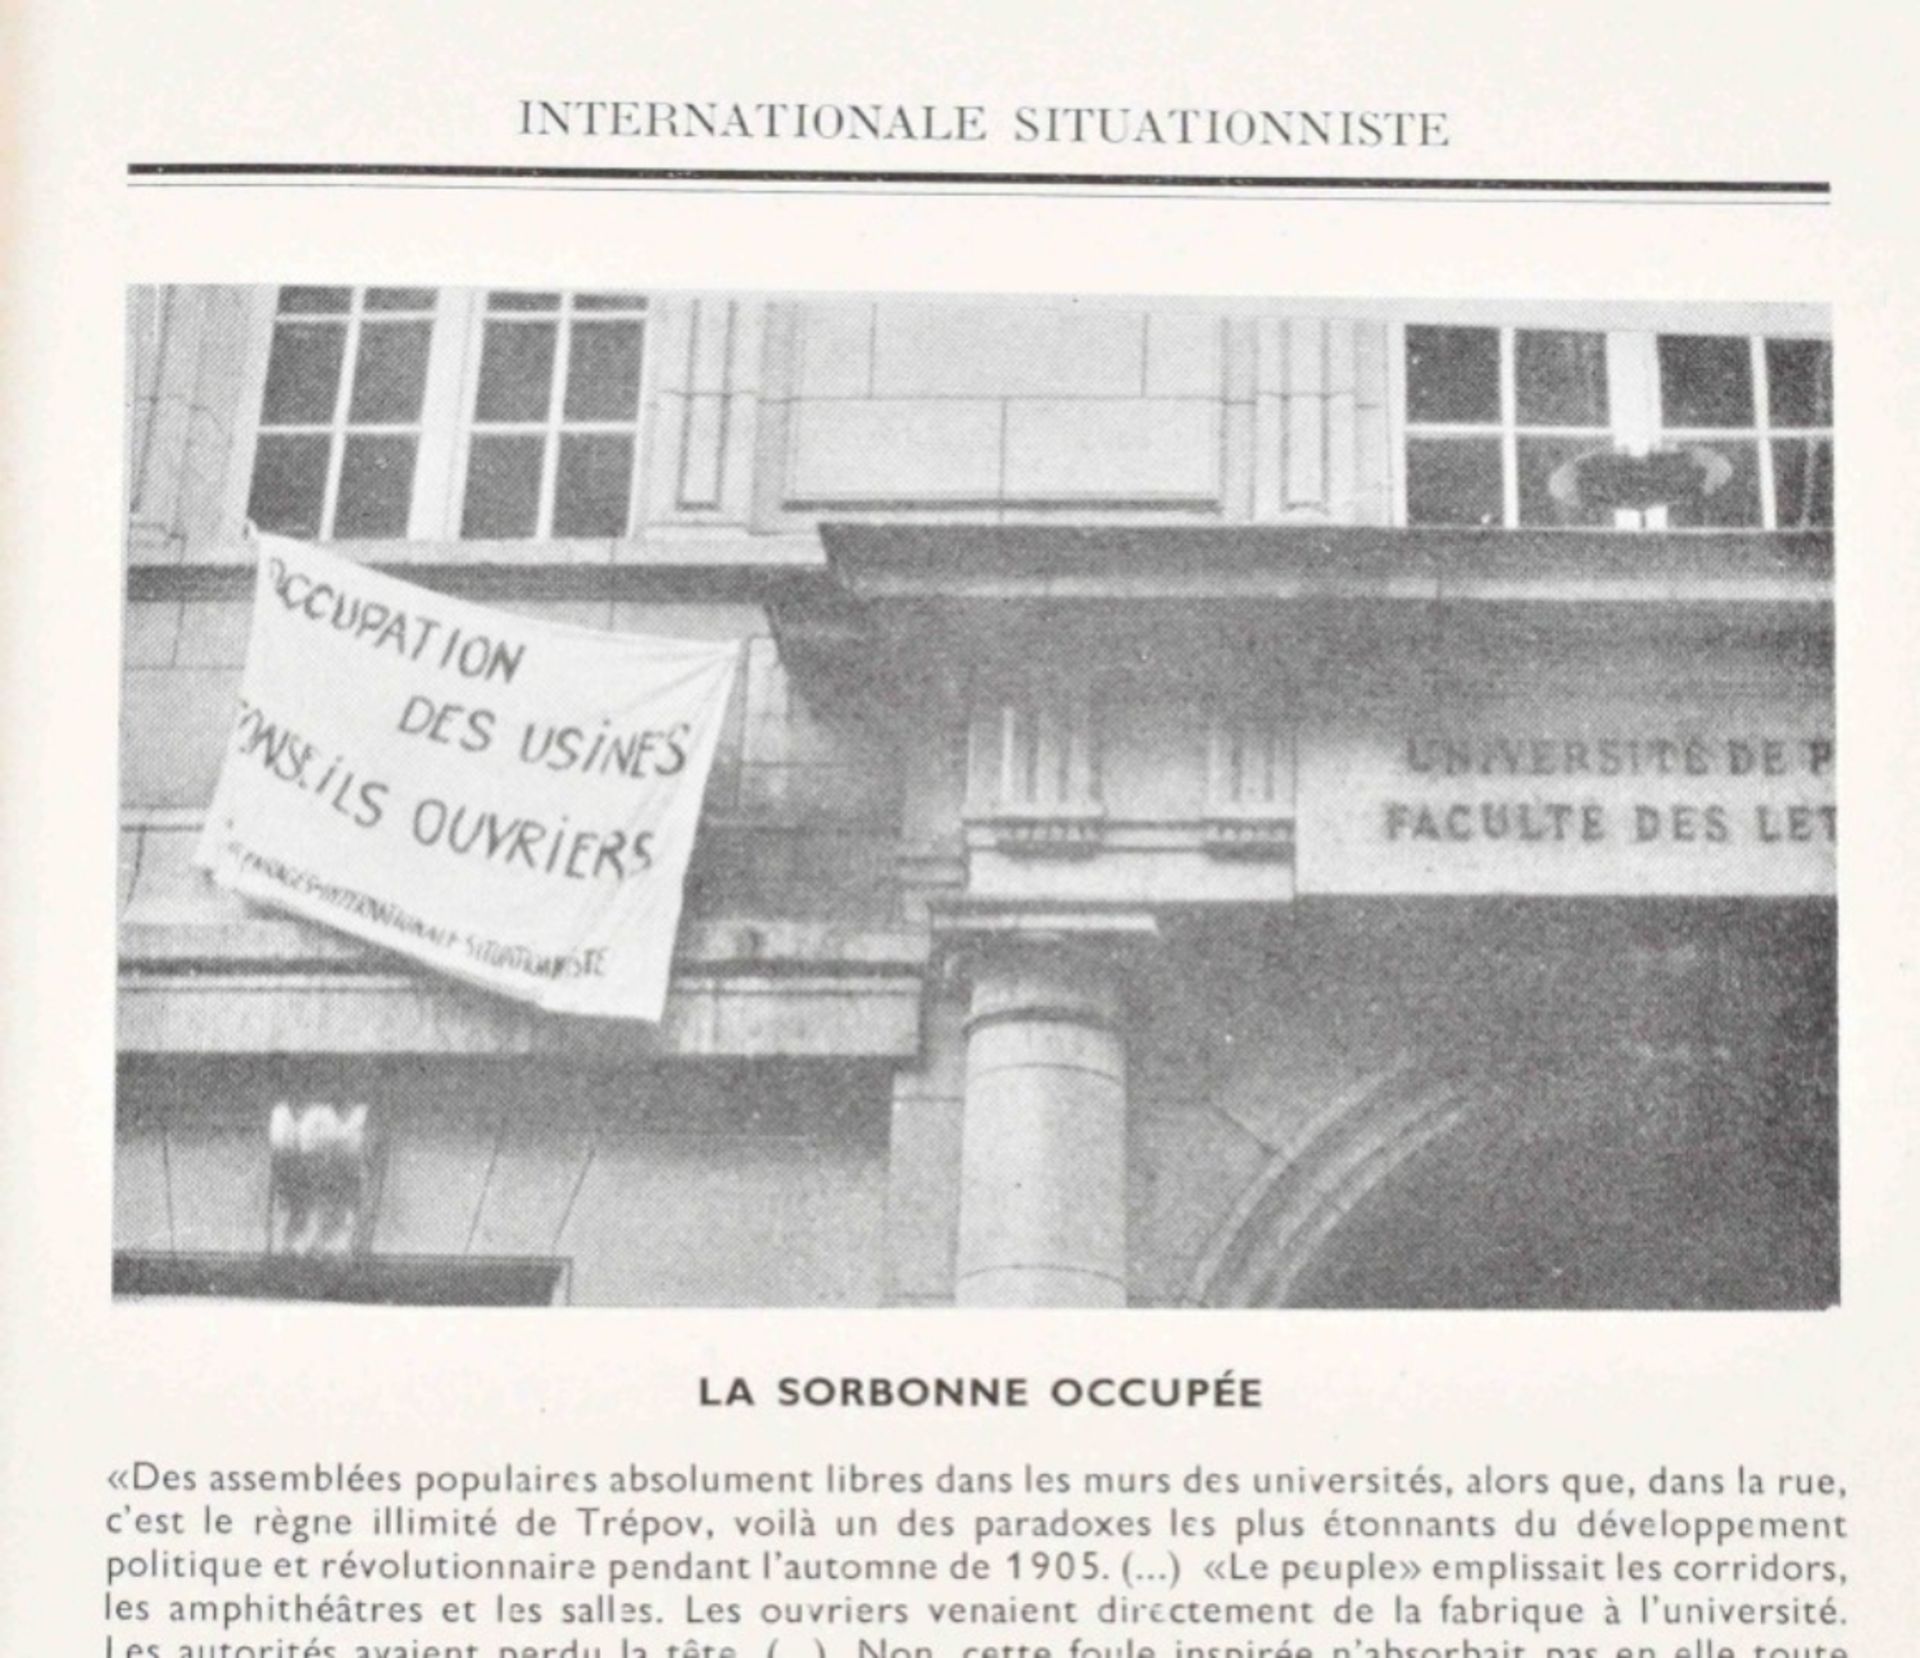 [Situationists] Plankton, Internationale Situationniste No.12 in disguise - Image 4 of 4